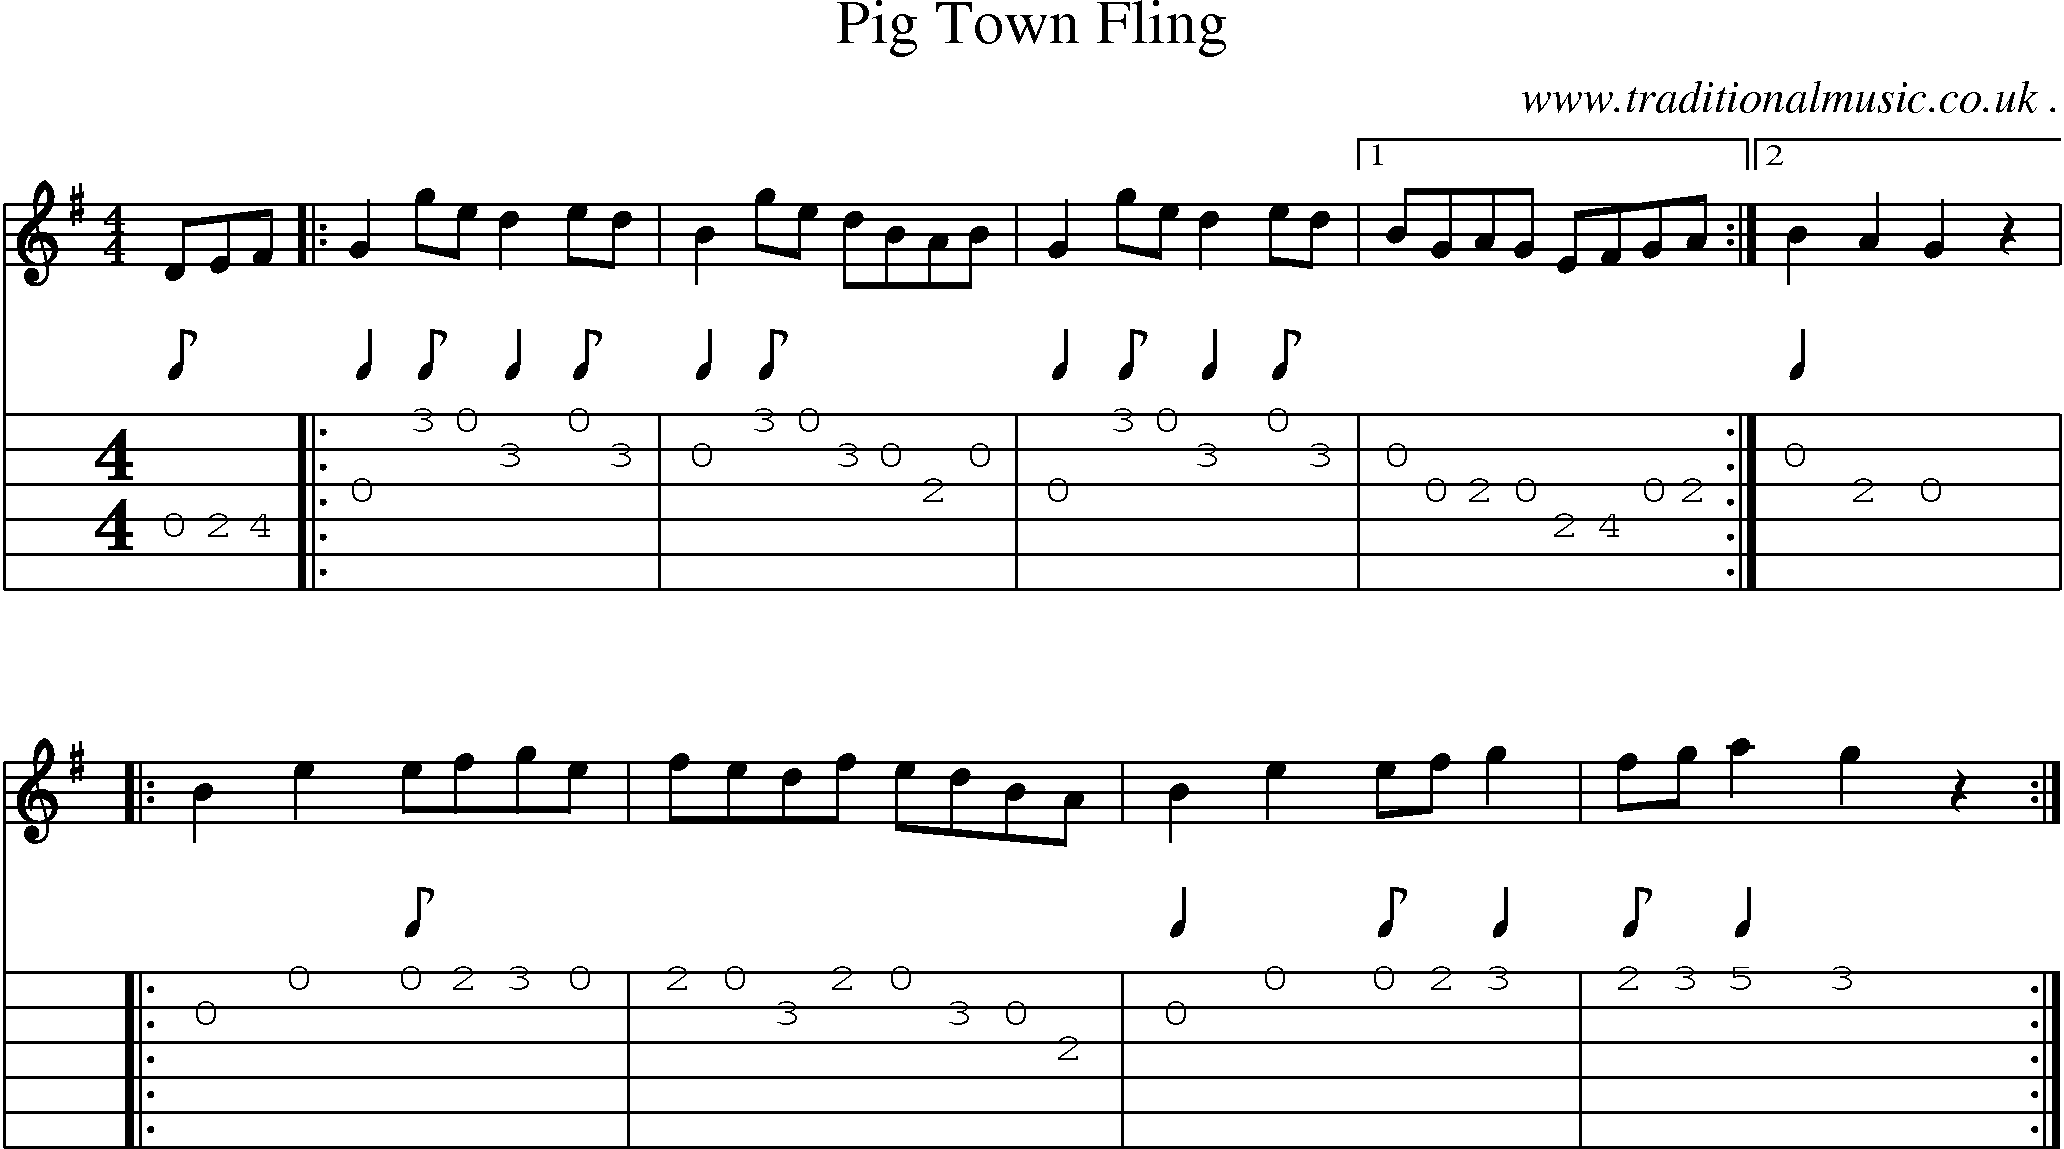 Sheet-music  score, Chords and Guitar Tabs for Pig Town Fling